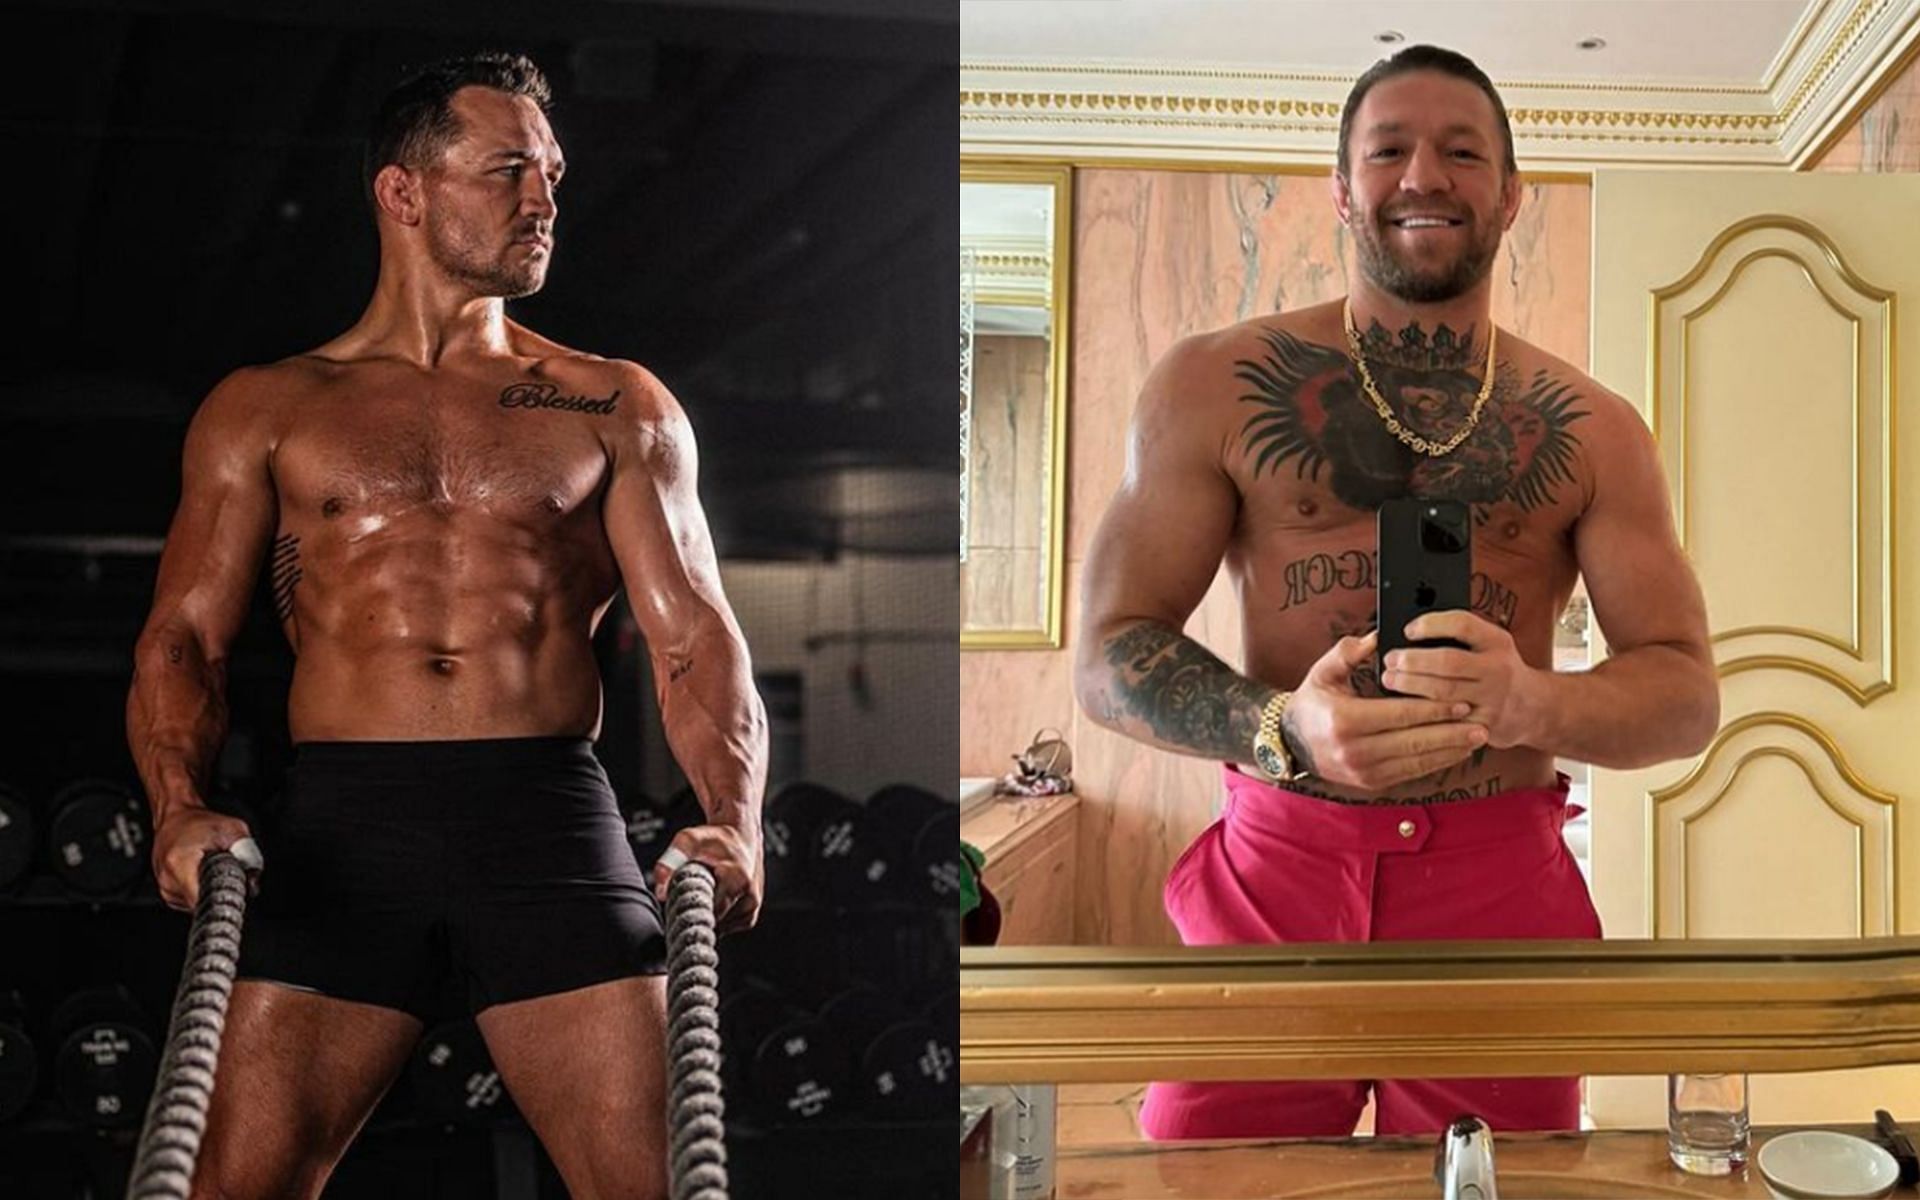 Michael Chandler (left) is fired up to take on Conor McGregor (right) (Images Courtesy: @mikechandlermma and @thenotoriousmma Instagram)